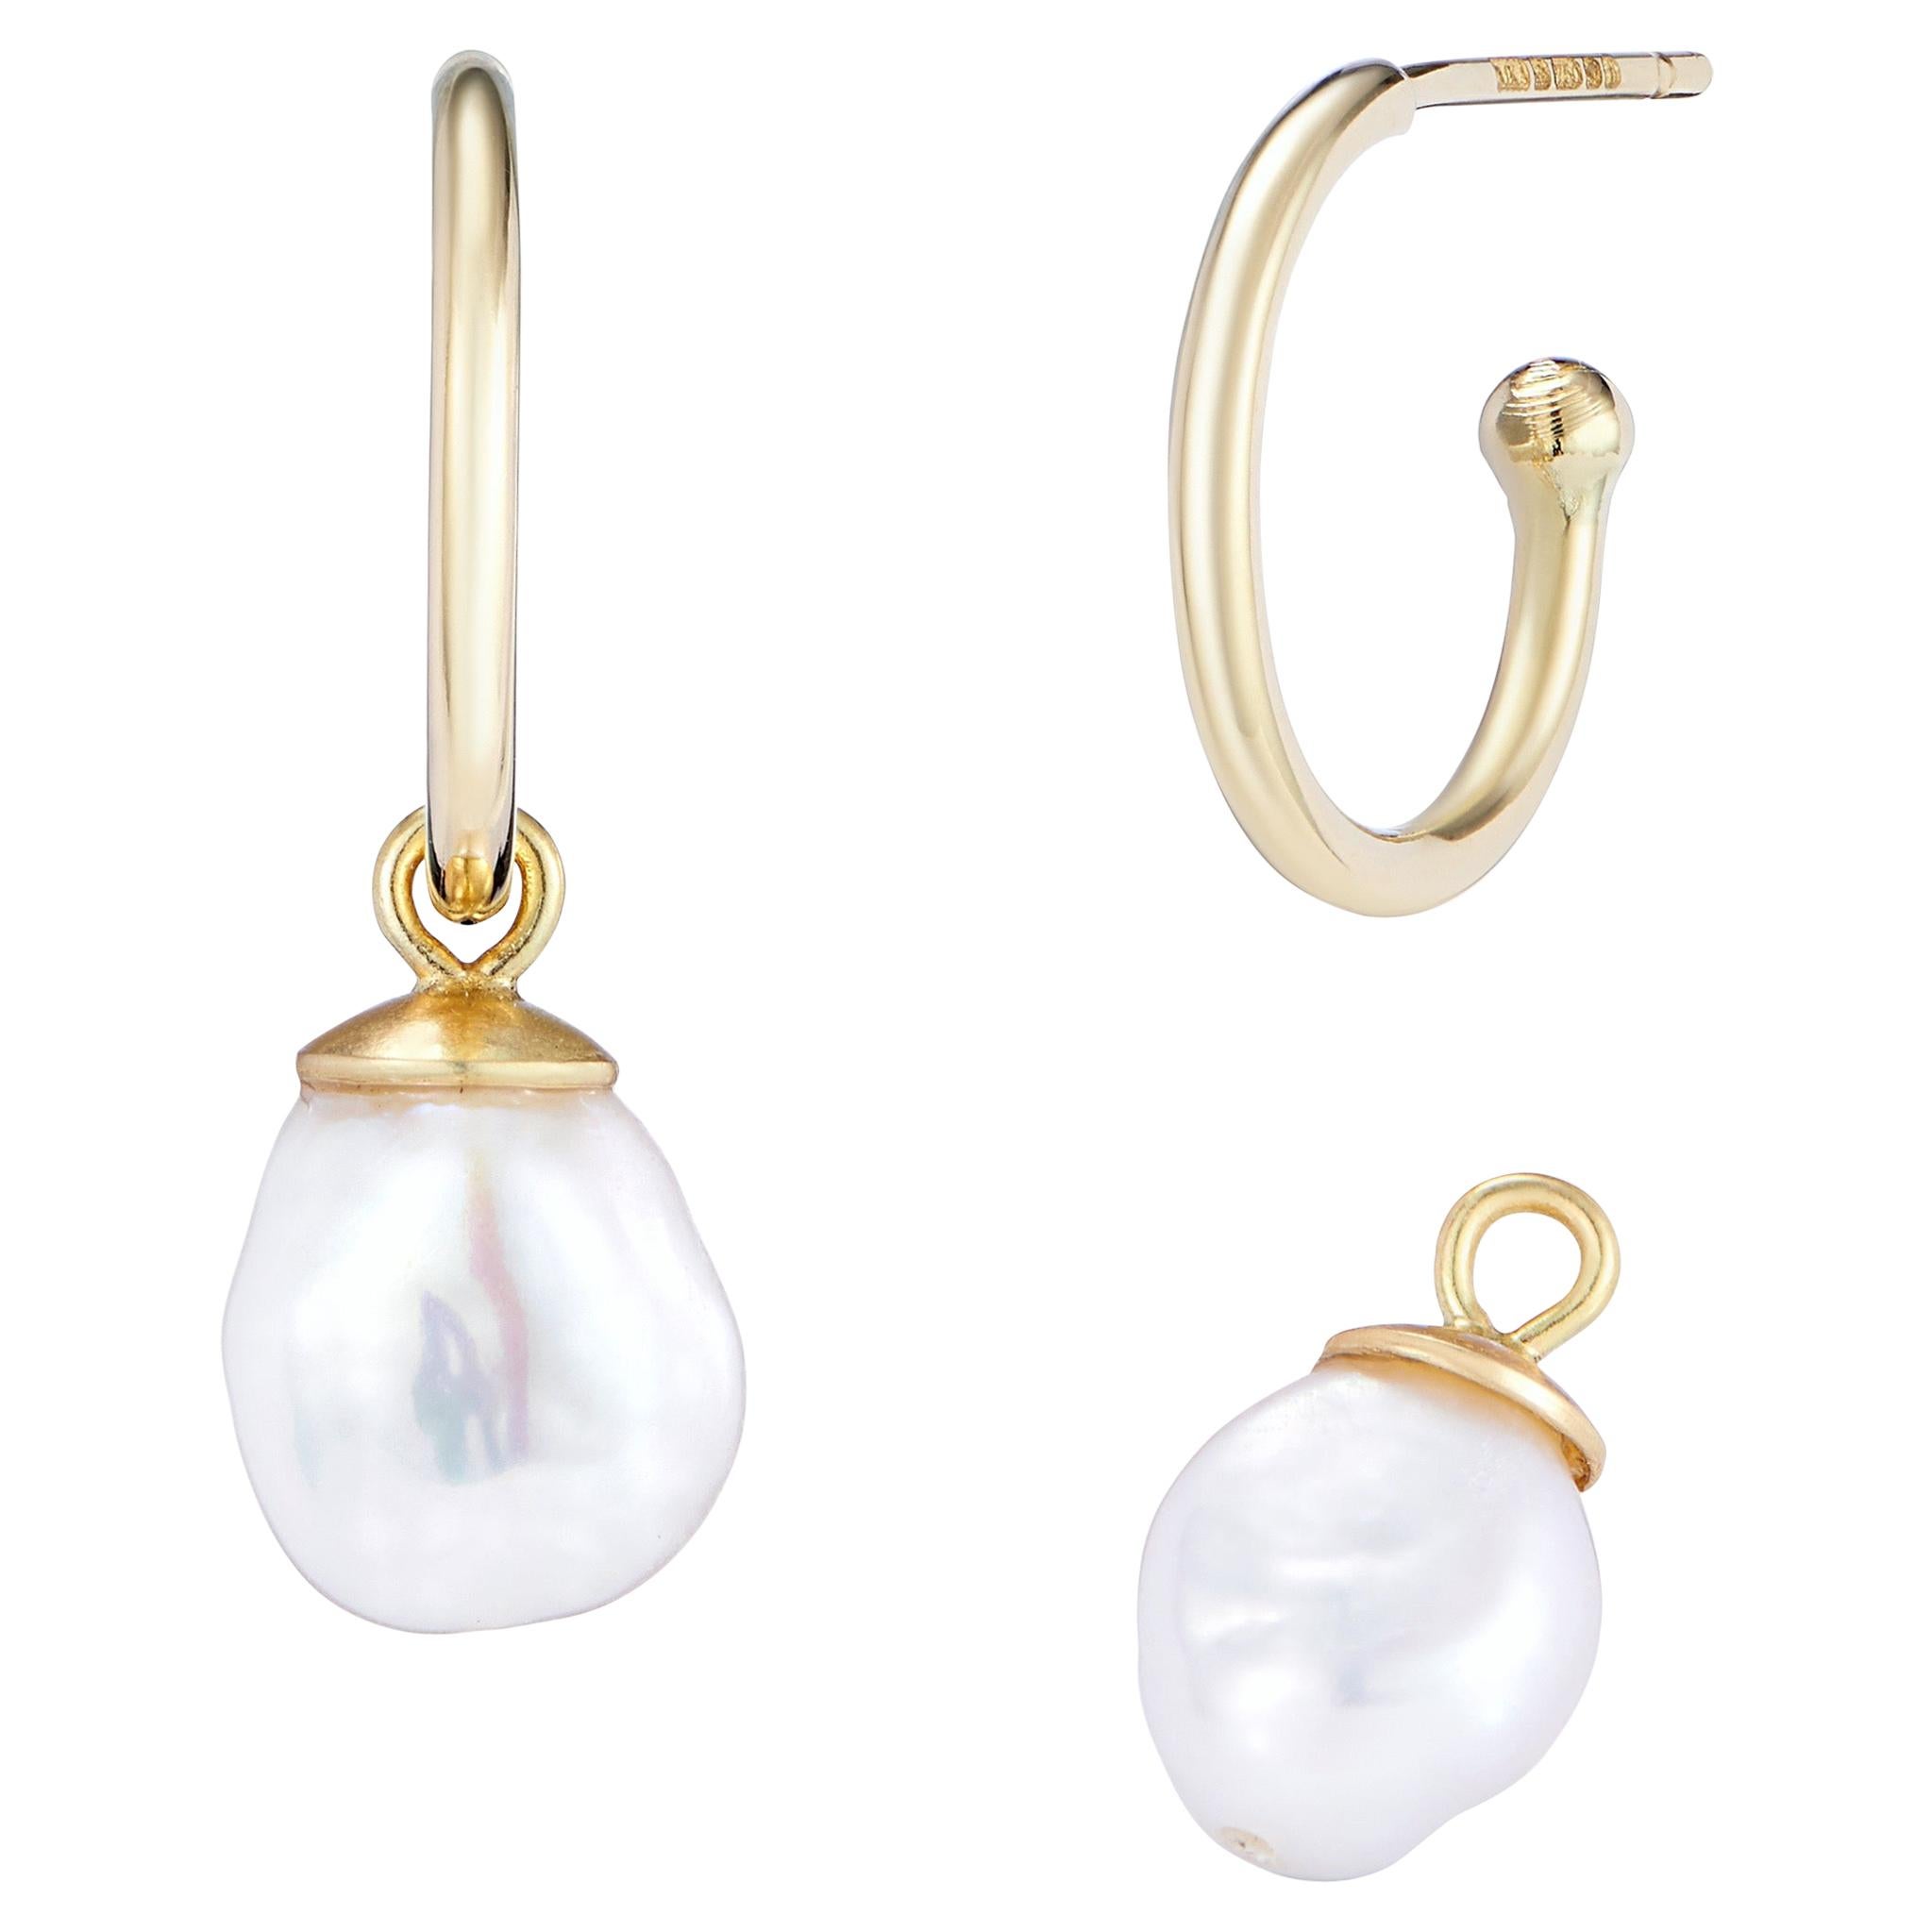 18 Karat Yellow Gold Hoops With Removable White Keshi Pearl Drops